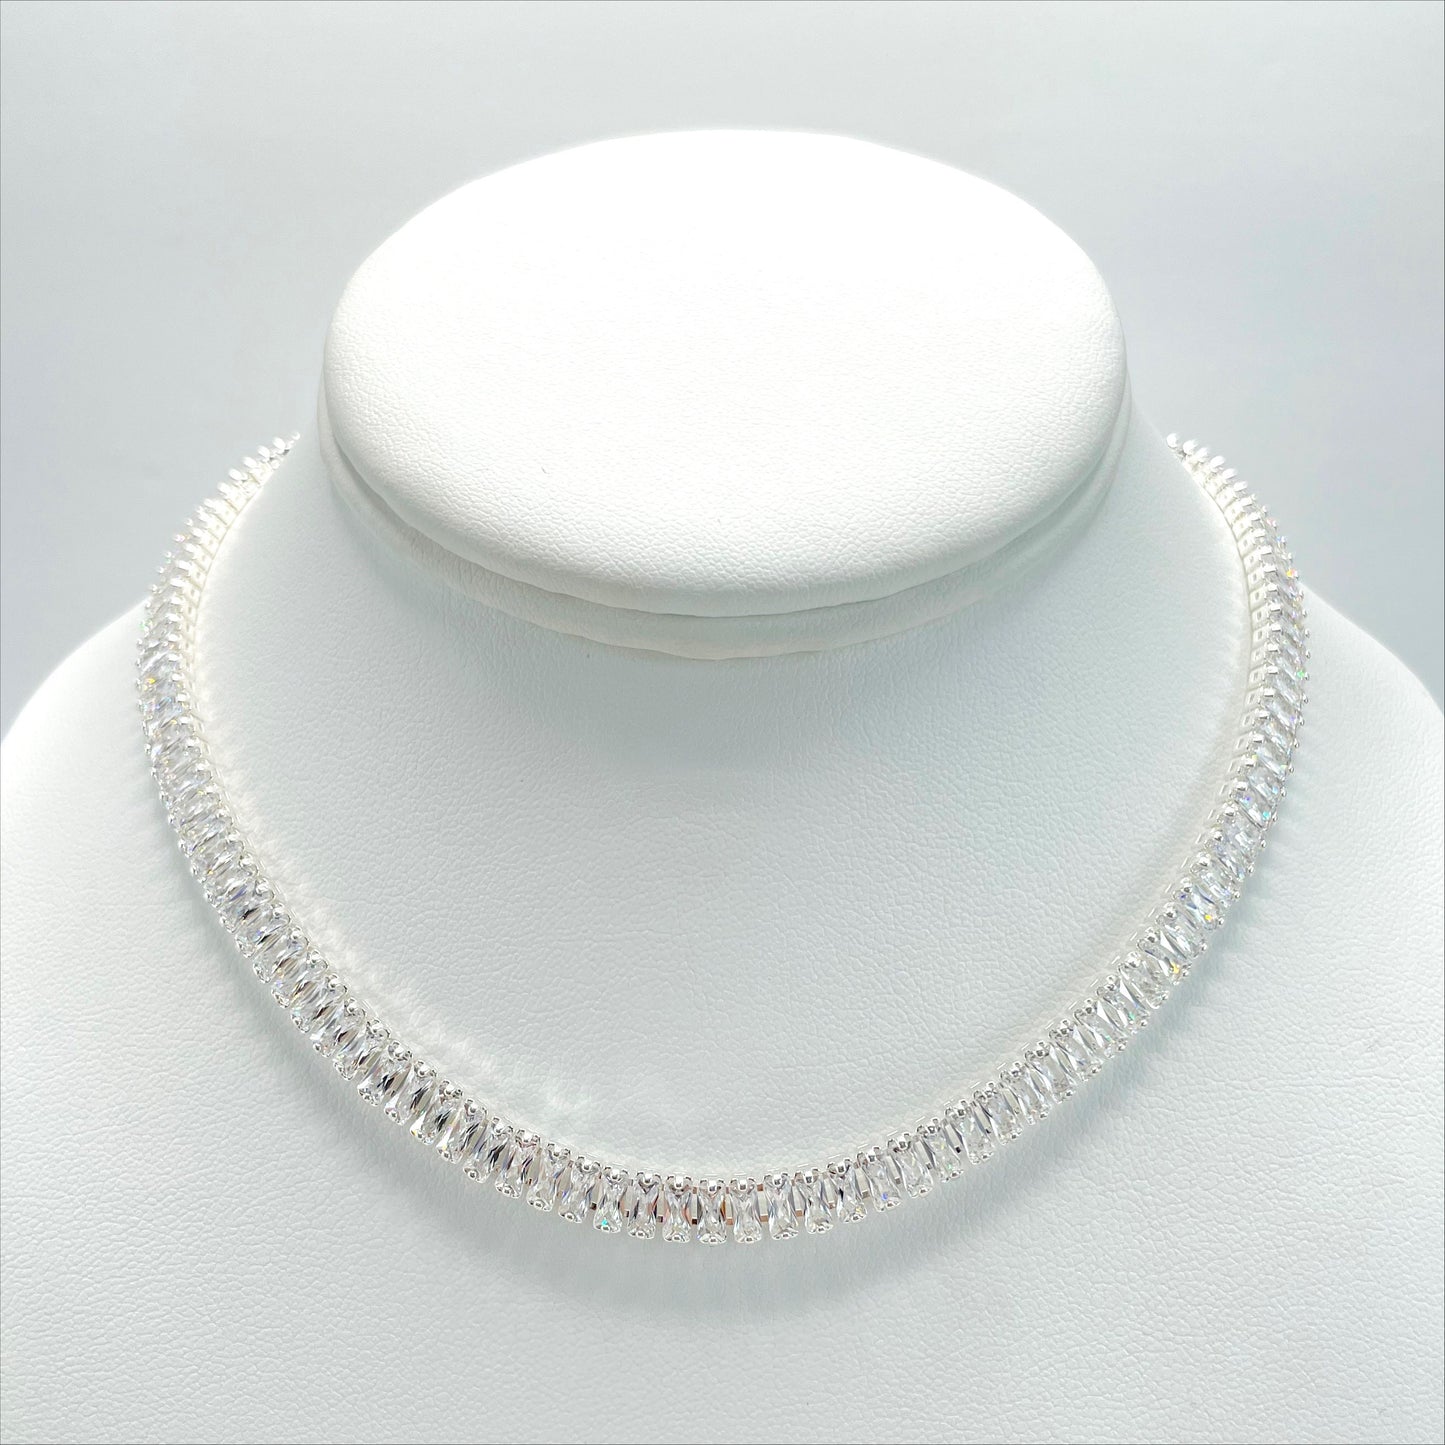 Silver Filled Choker or Bracelet Featuring High Quality Clear White Cubic Zirconia Wholesale Jewelry Making Supplies